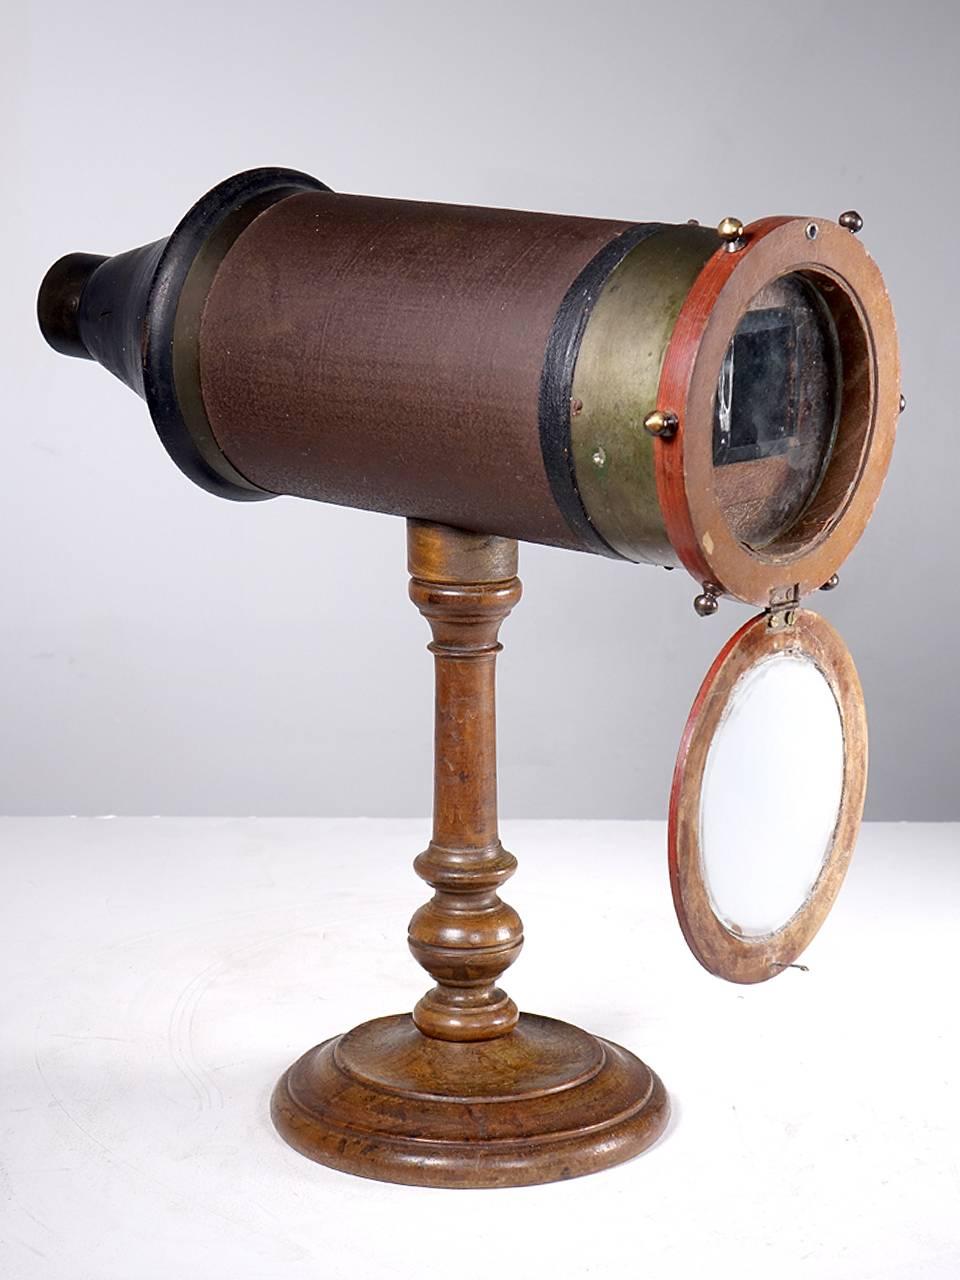 This scope is unsigned and was acquired from a European collector. It could be American but I'm guessing its not. The eyepiece and turning mechanism are brass. The tube is canvas wrapped and the tapered back is turned wood. The unique feature on